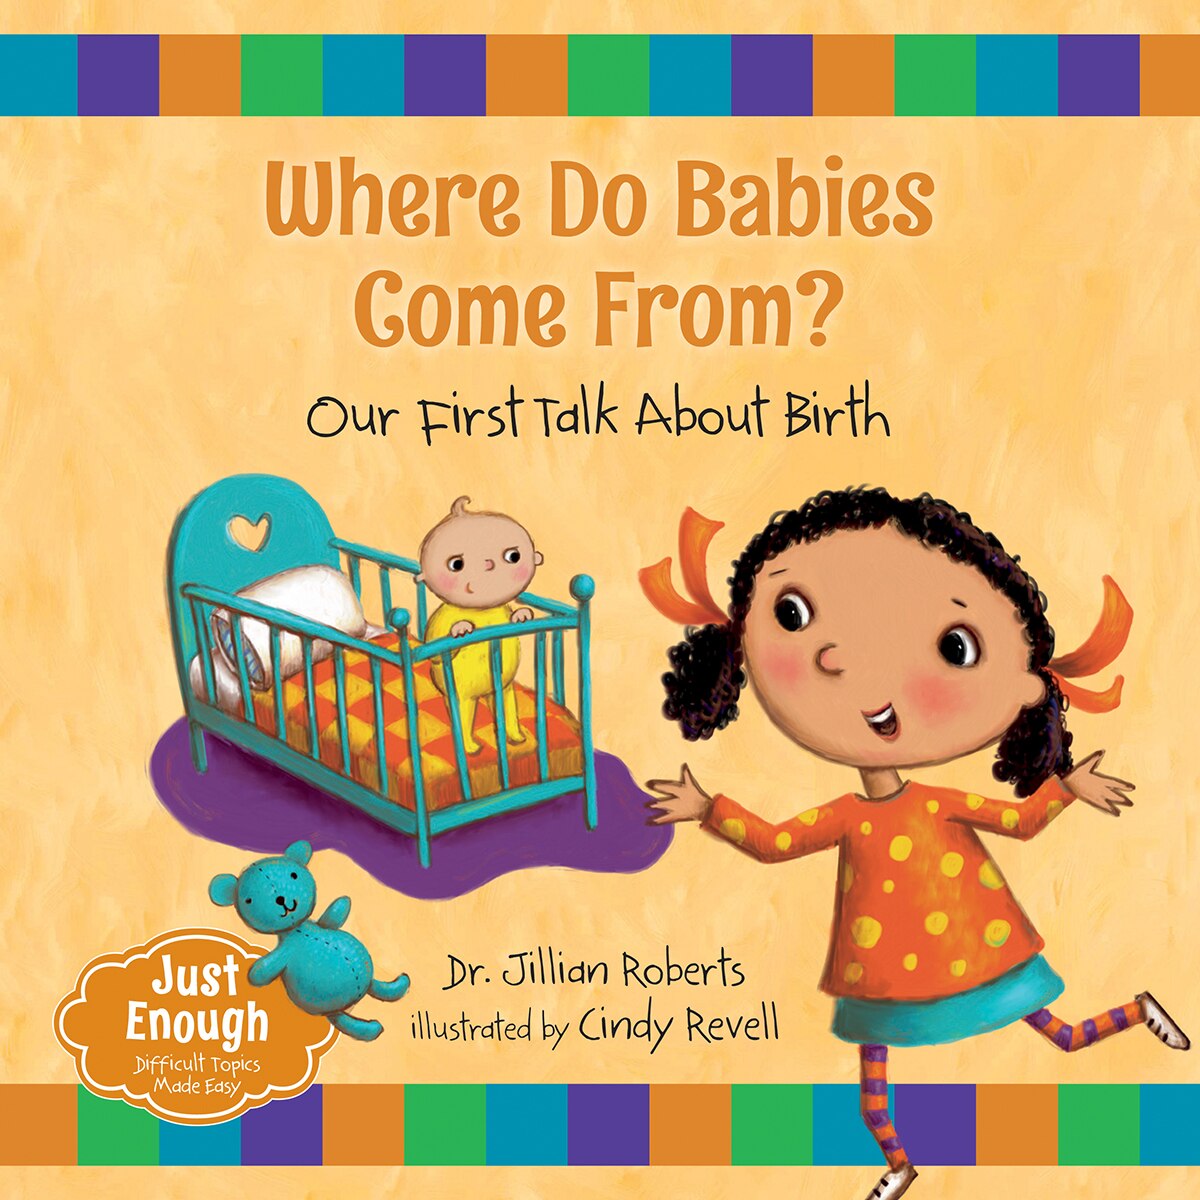 Cover image for Where Do Babies Come From? by Dr. Jillian Roberts